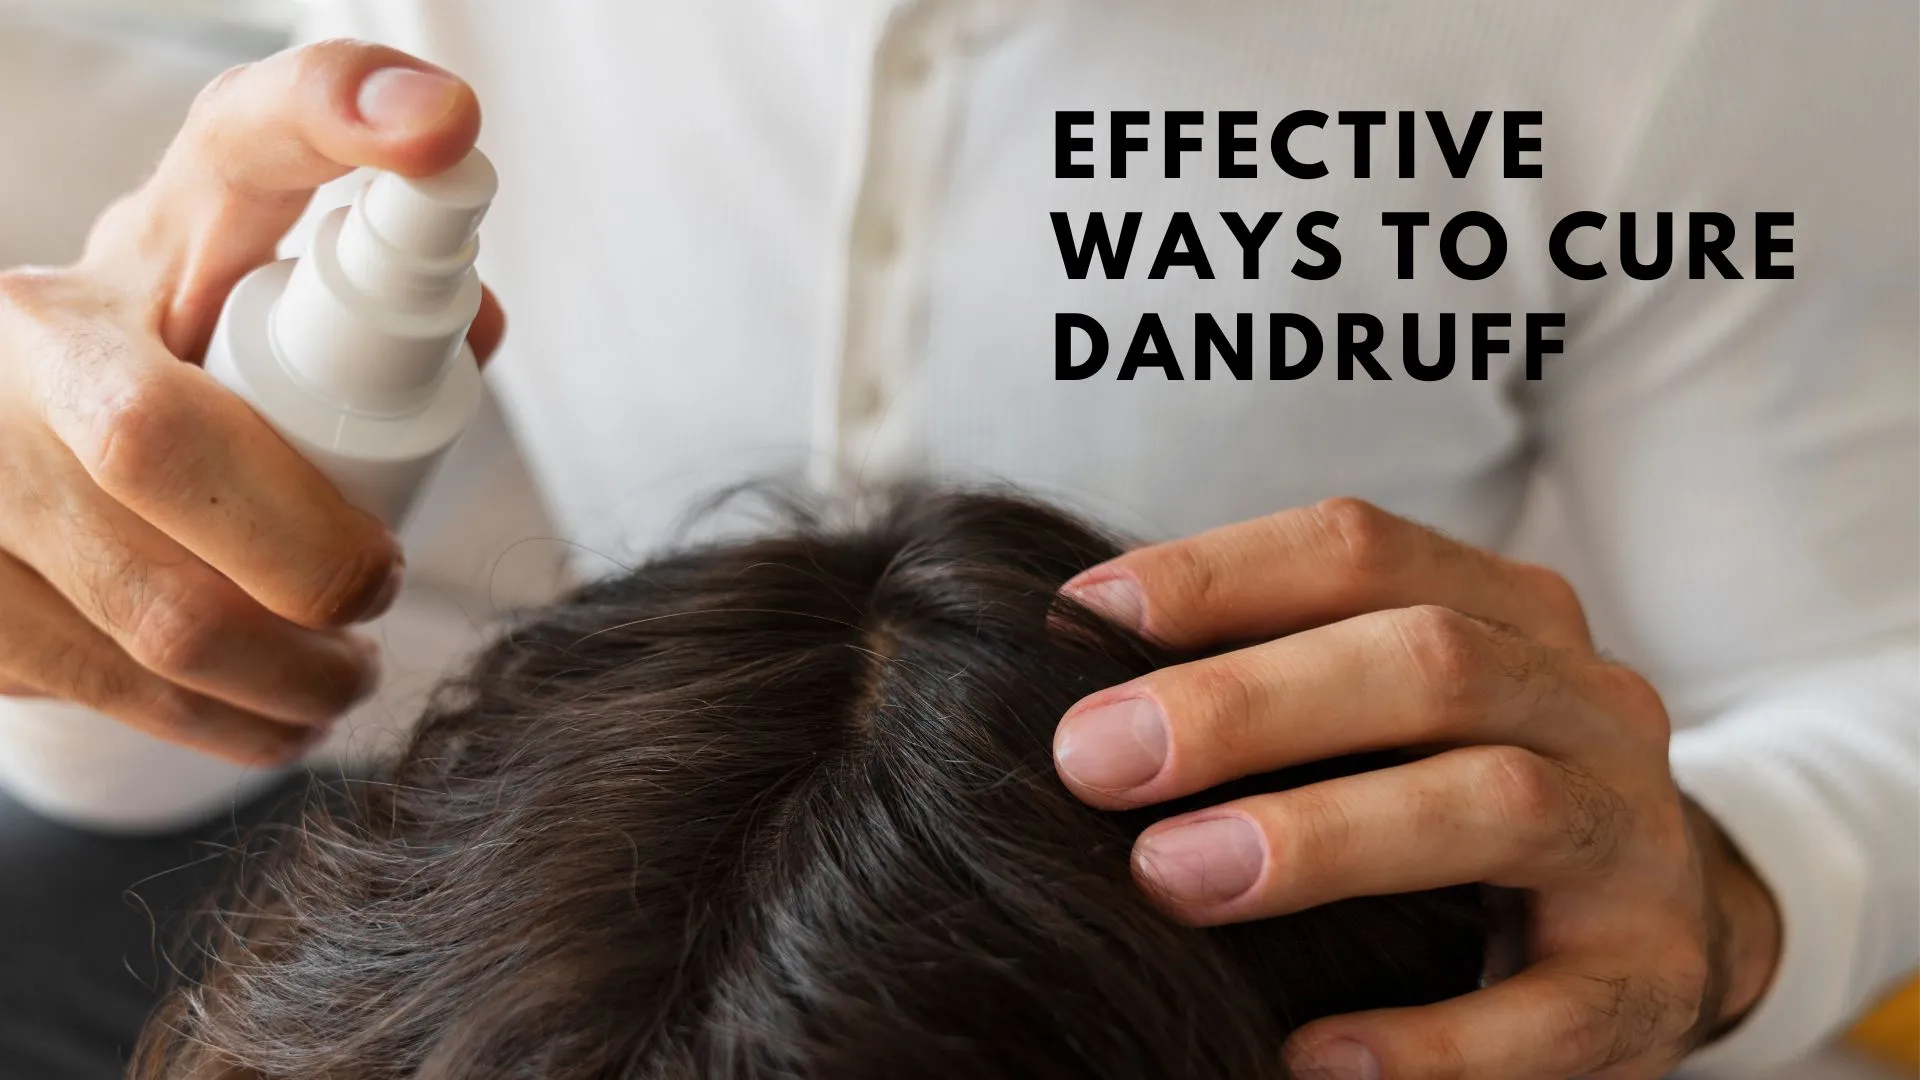 Effective Ways to Cure Dandruff